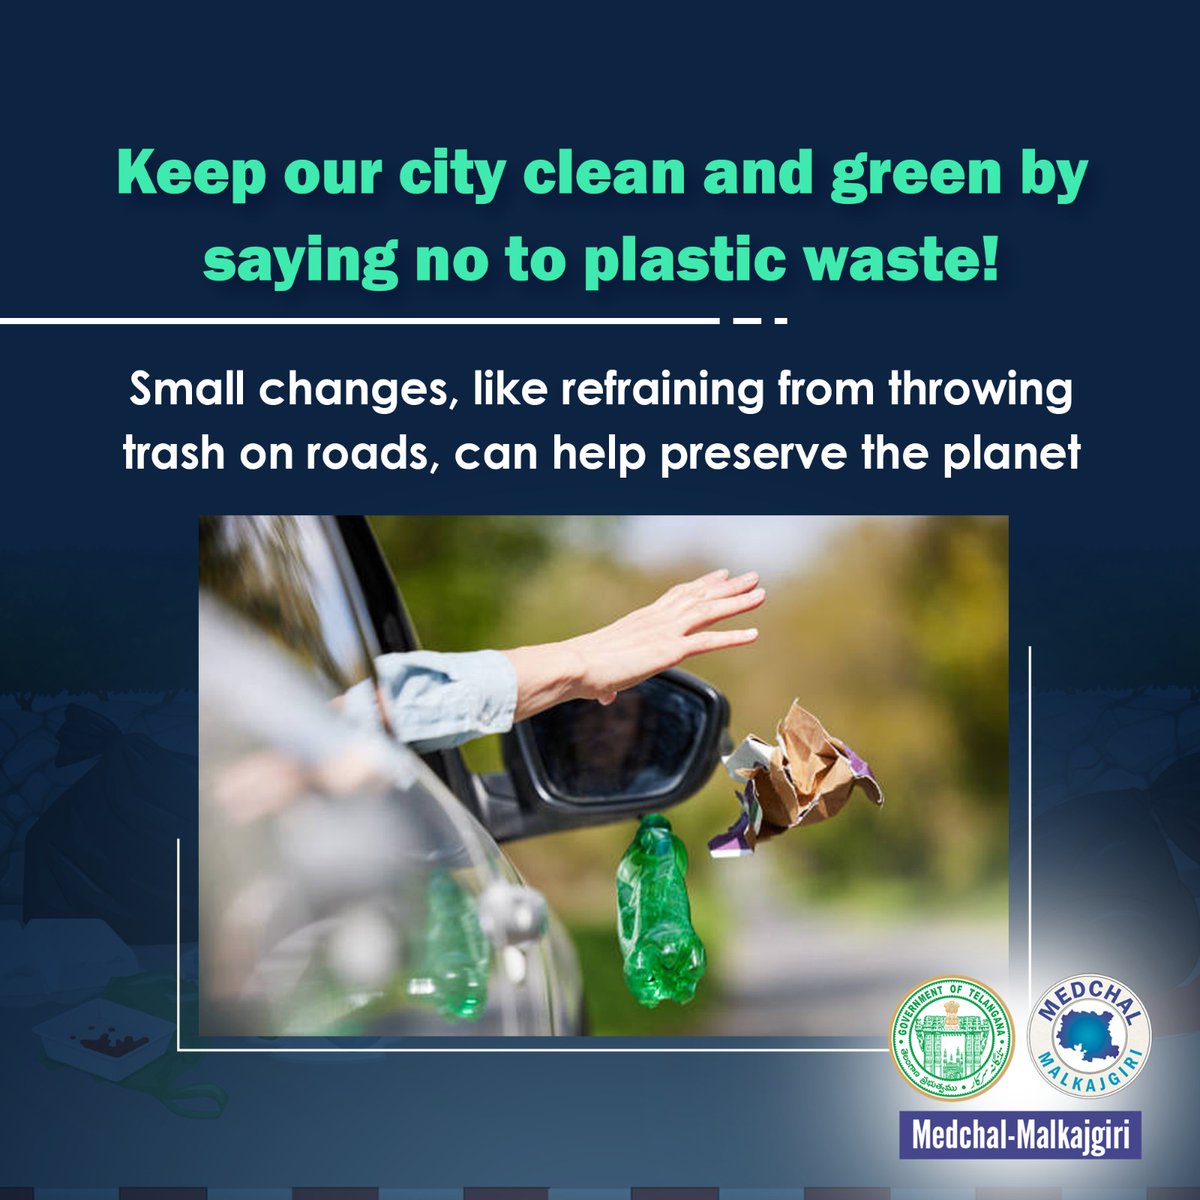 Keep our city clean and green by saying no to plastic waste! Small changes, like refraining from throwing trash on roads, can help preserve the planet #SayNoToPlastic #SayNoToGarbageOnRoads #KeepcityClean @KTRBRS @arvindkumar_ias #MedchalMalkajgiri @AmoyKumarIAS @Prateek_JainIAS